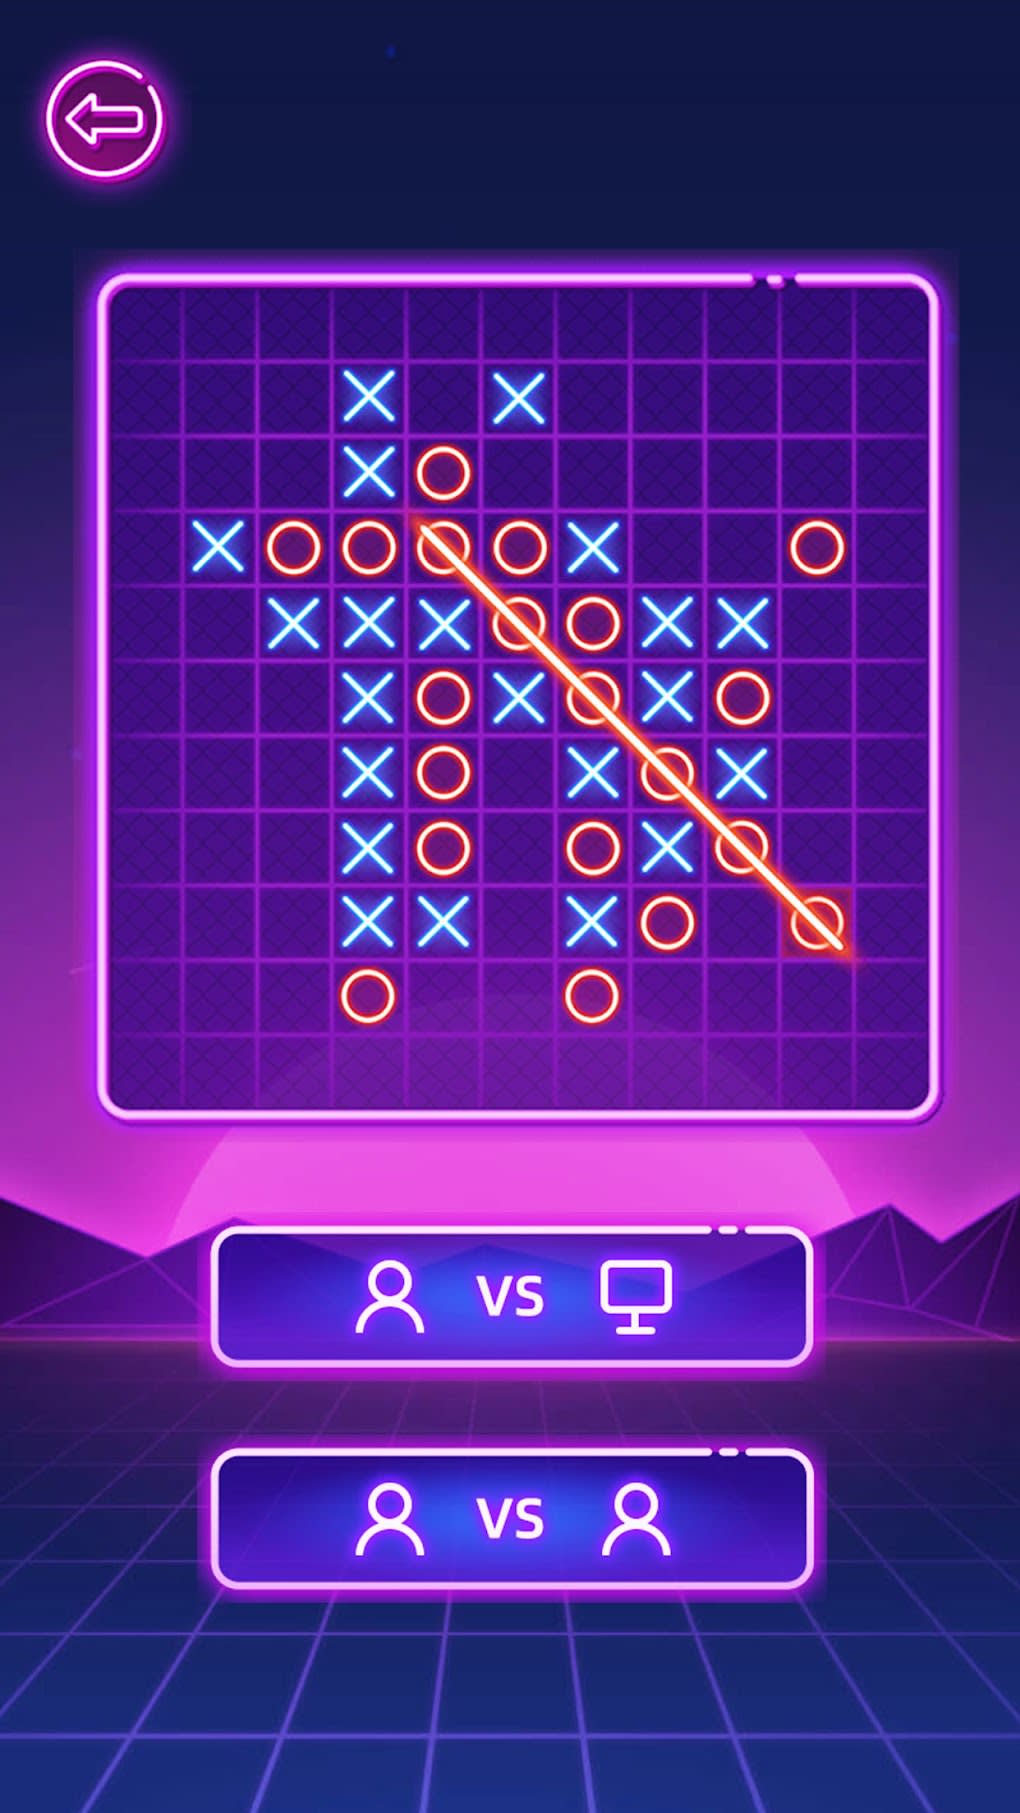 Play Tic Tac Toe 2 Player: XOXO Online for Free on PC & Mobile